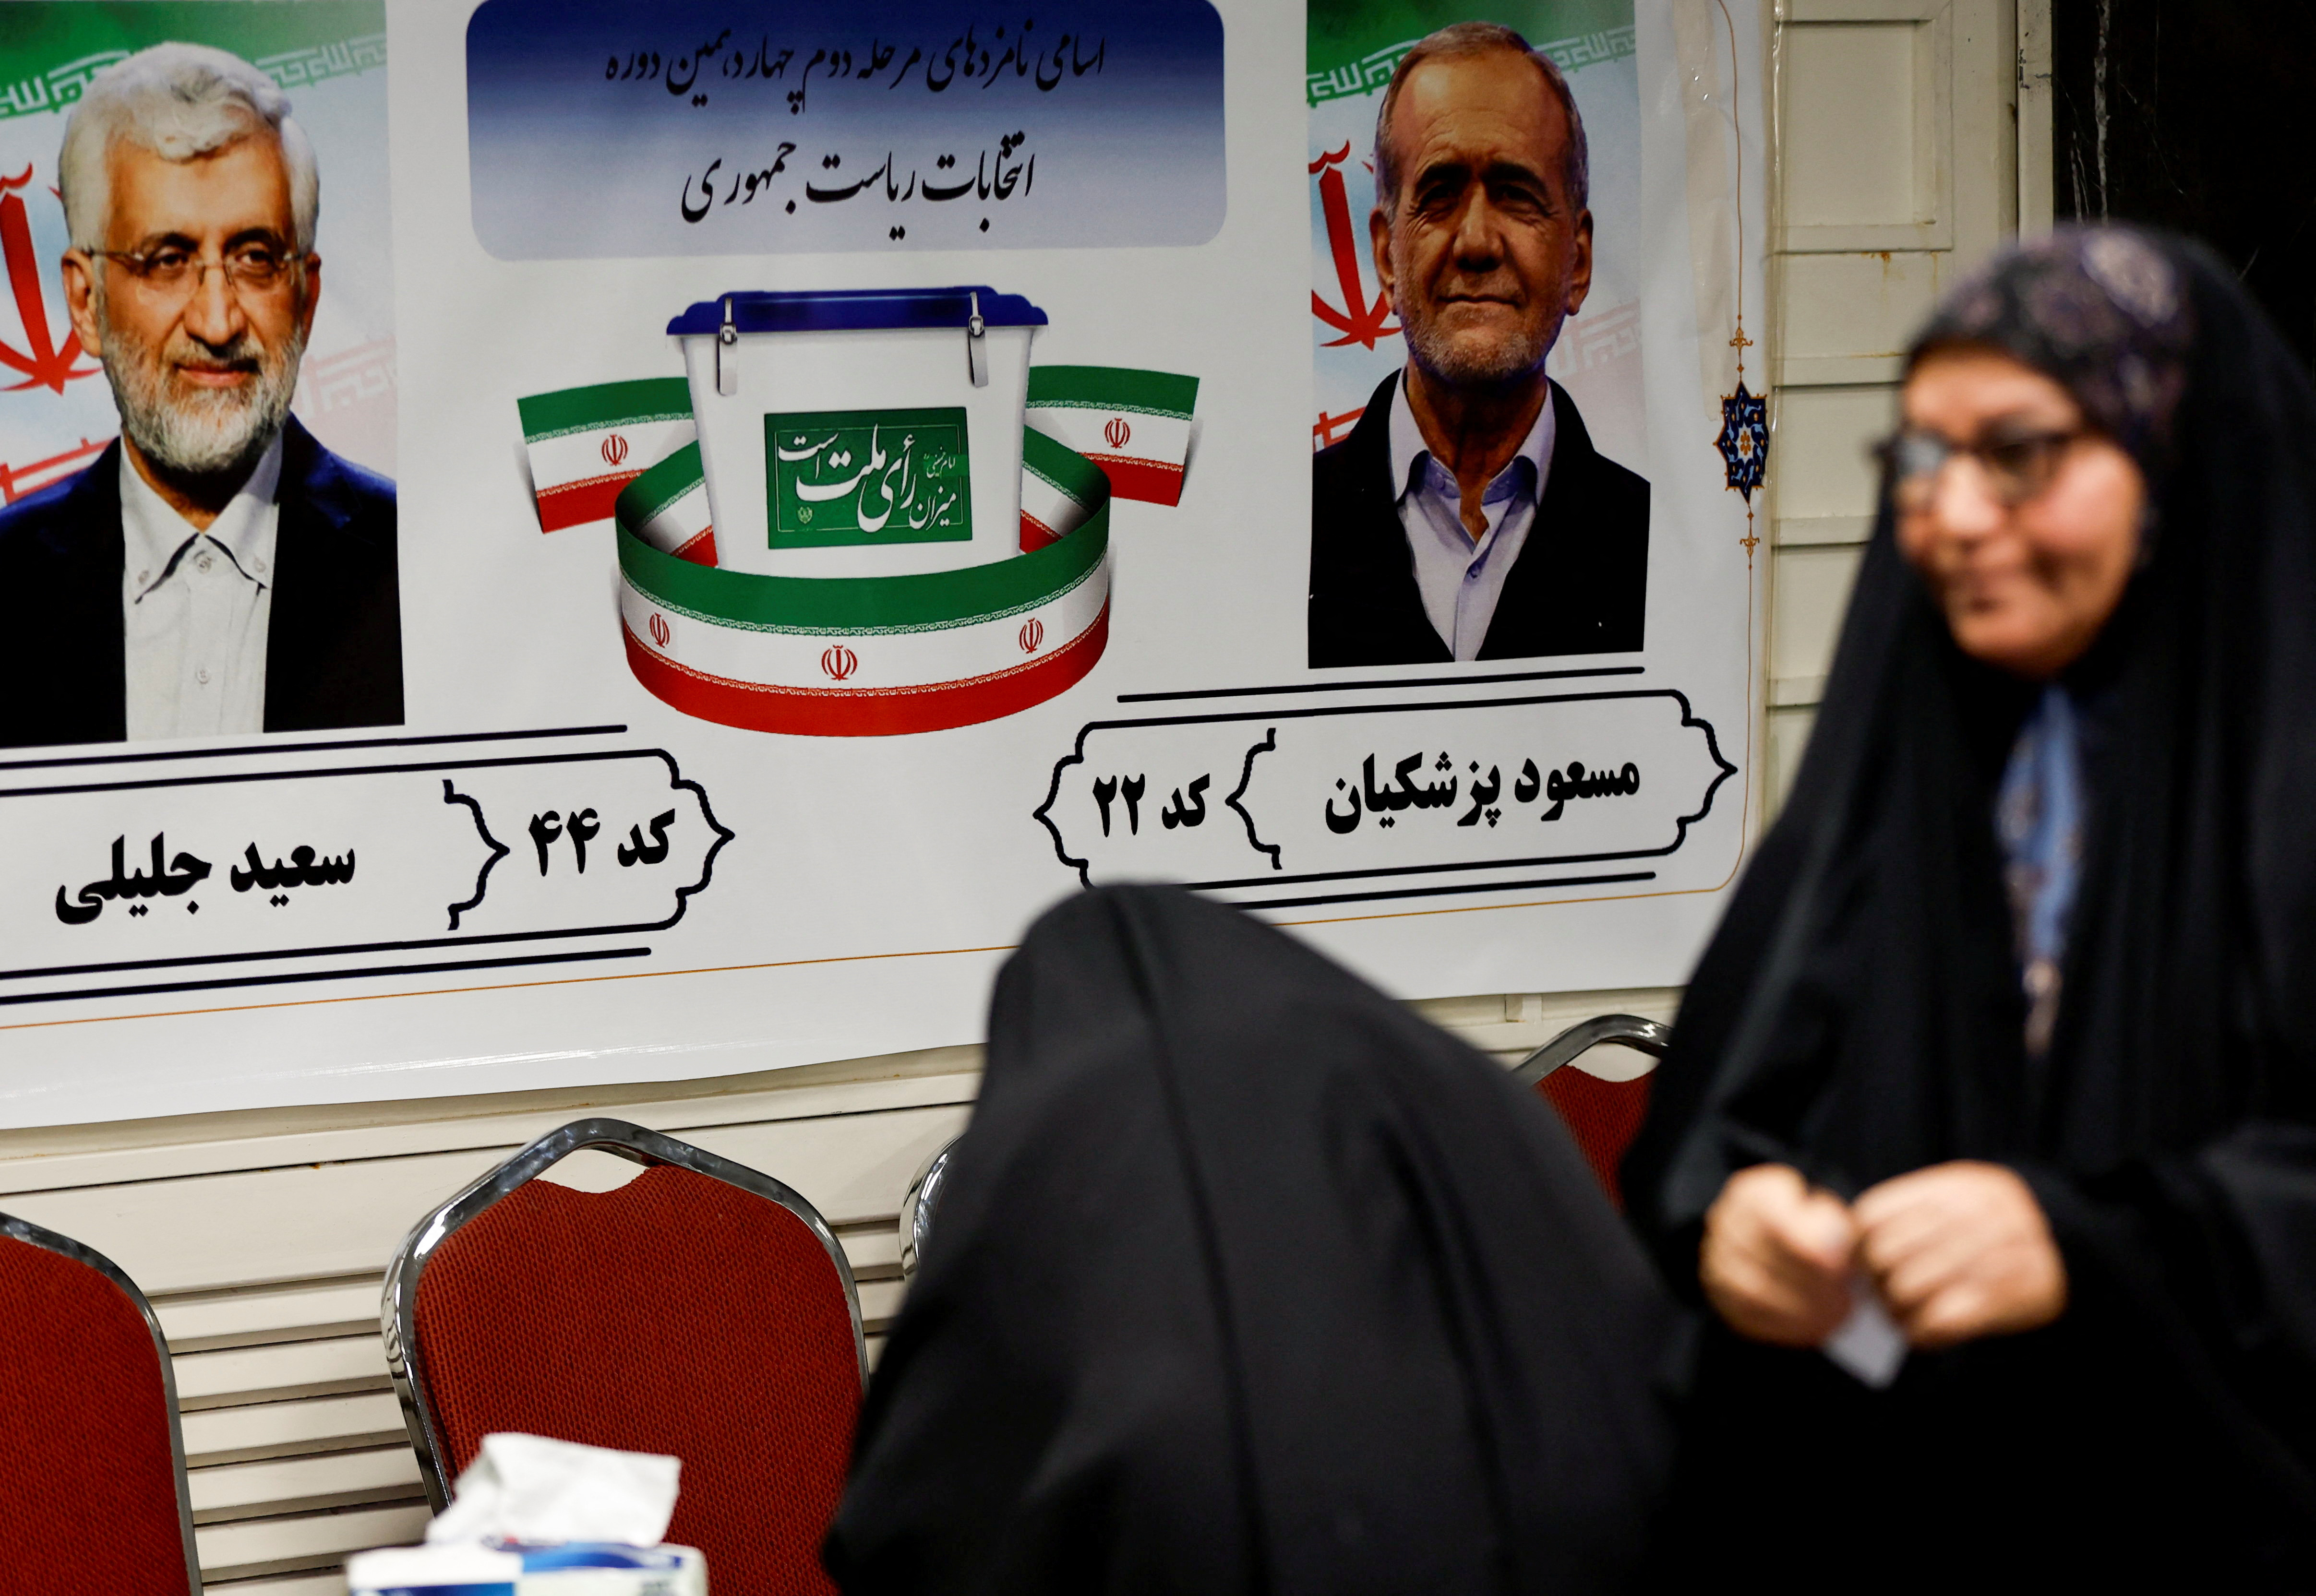 Iranian voters participate in the run-off presidential election between Masoud Pezeshkian and Saeed Jalili,at the Iranian embassy, in Baghdad